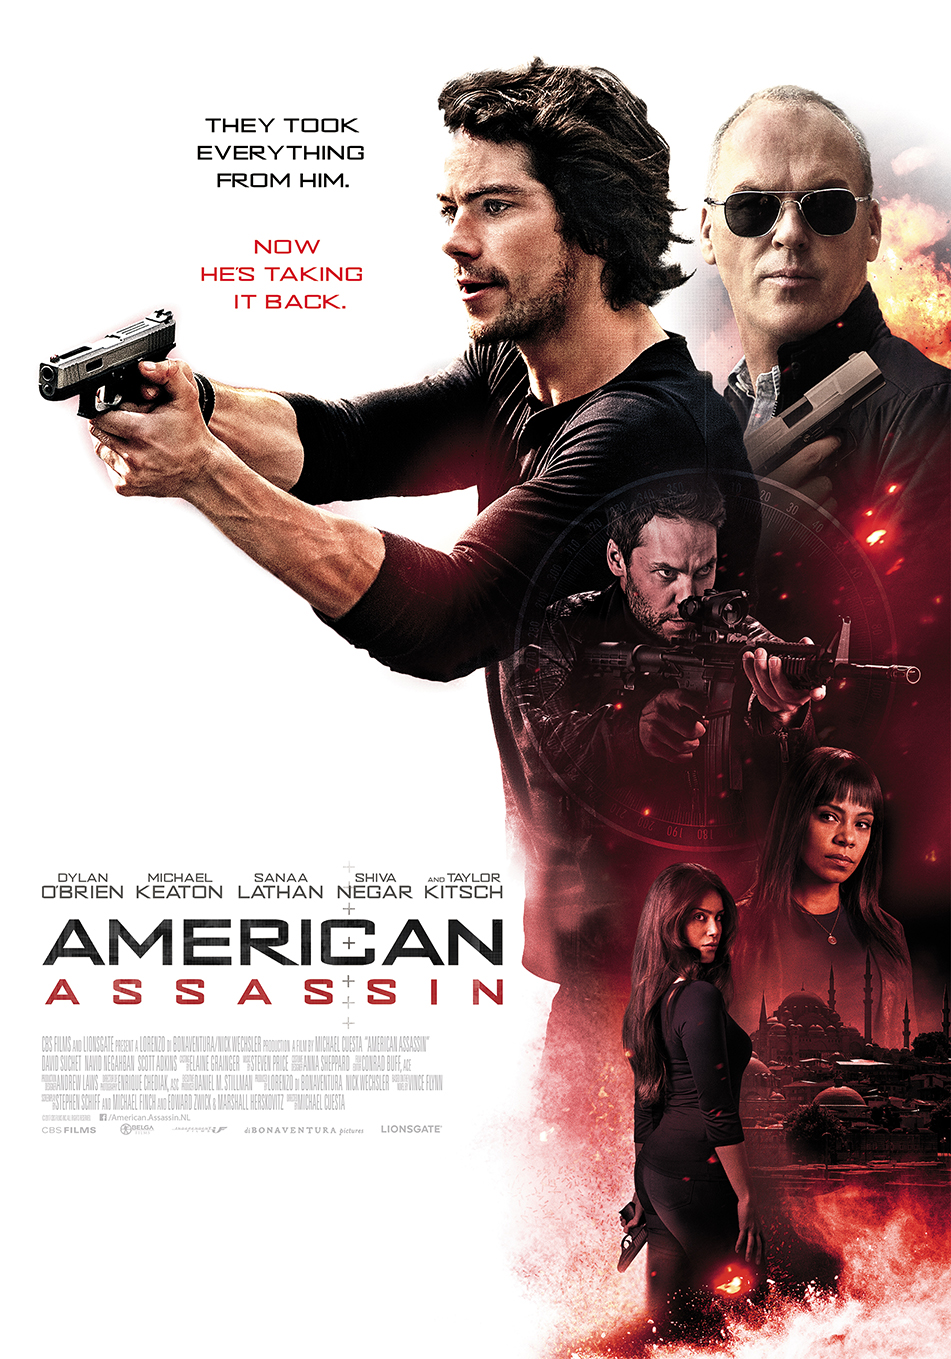 American Assassin - Daily Cappuccino - Lifestyle Blog